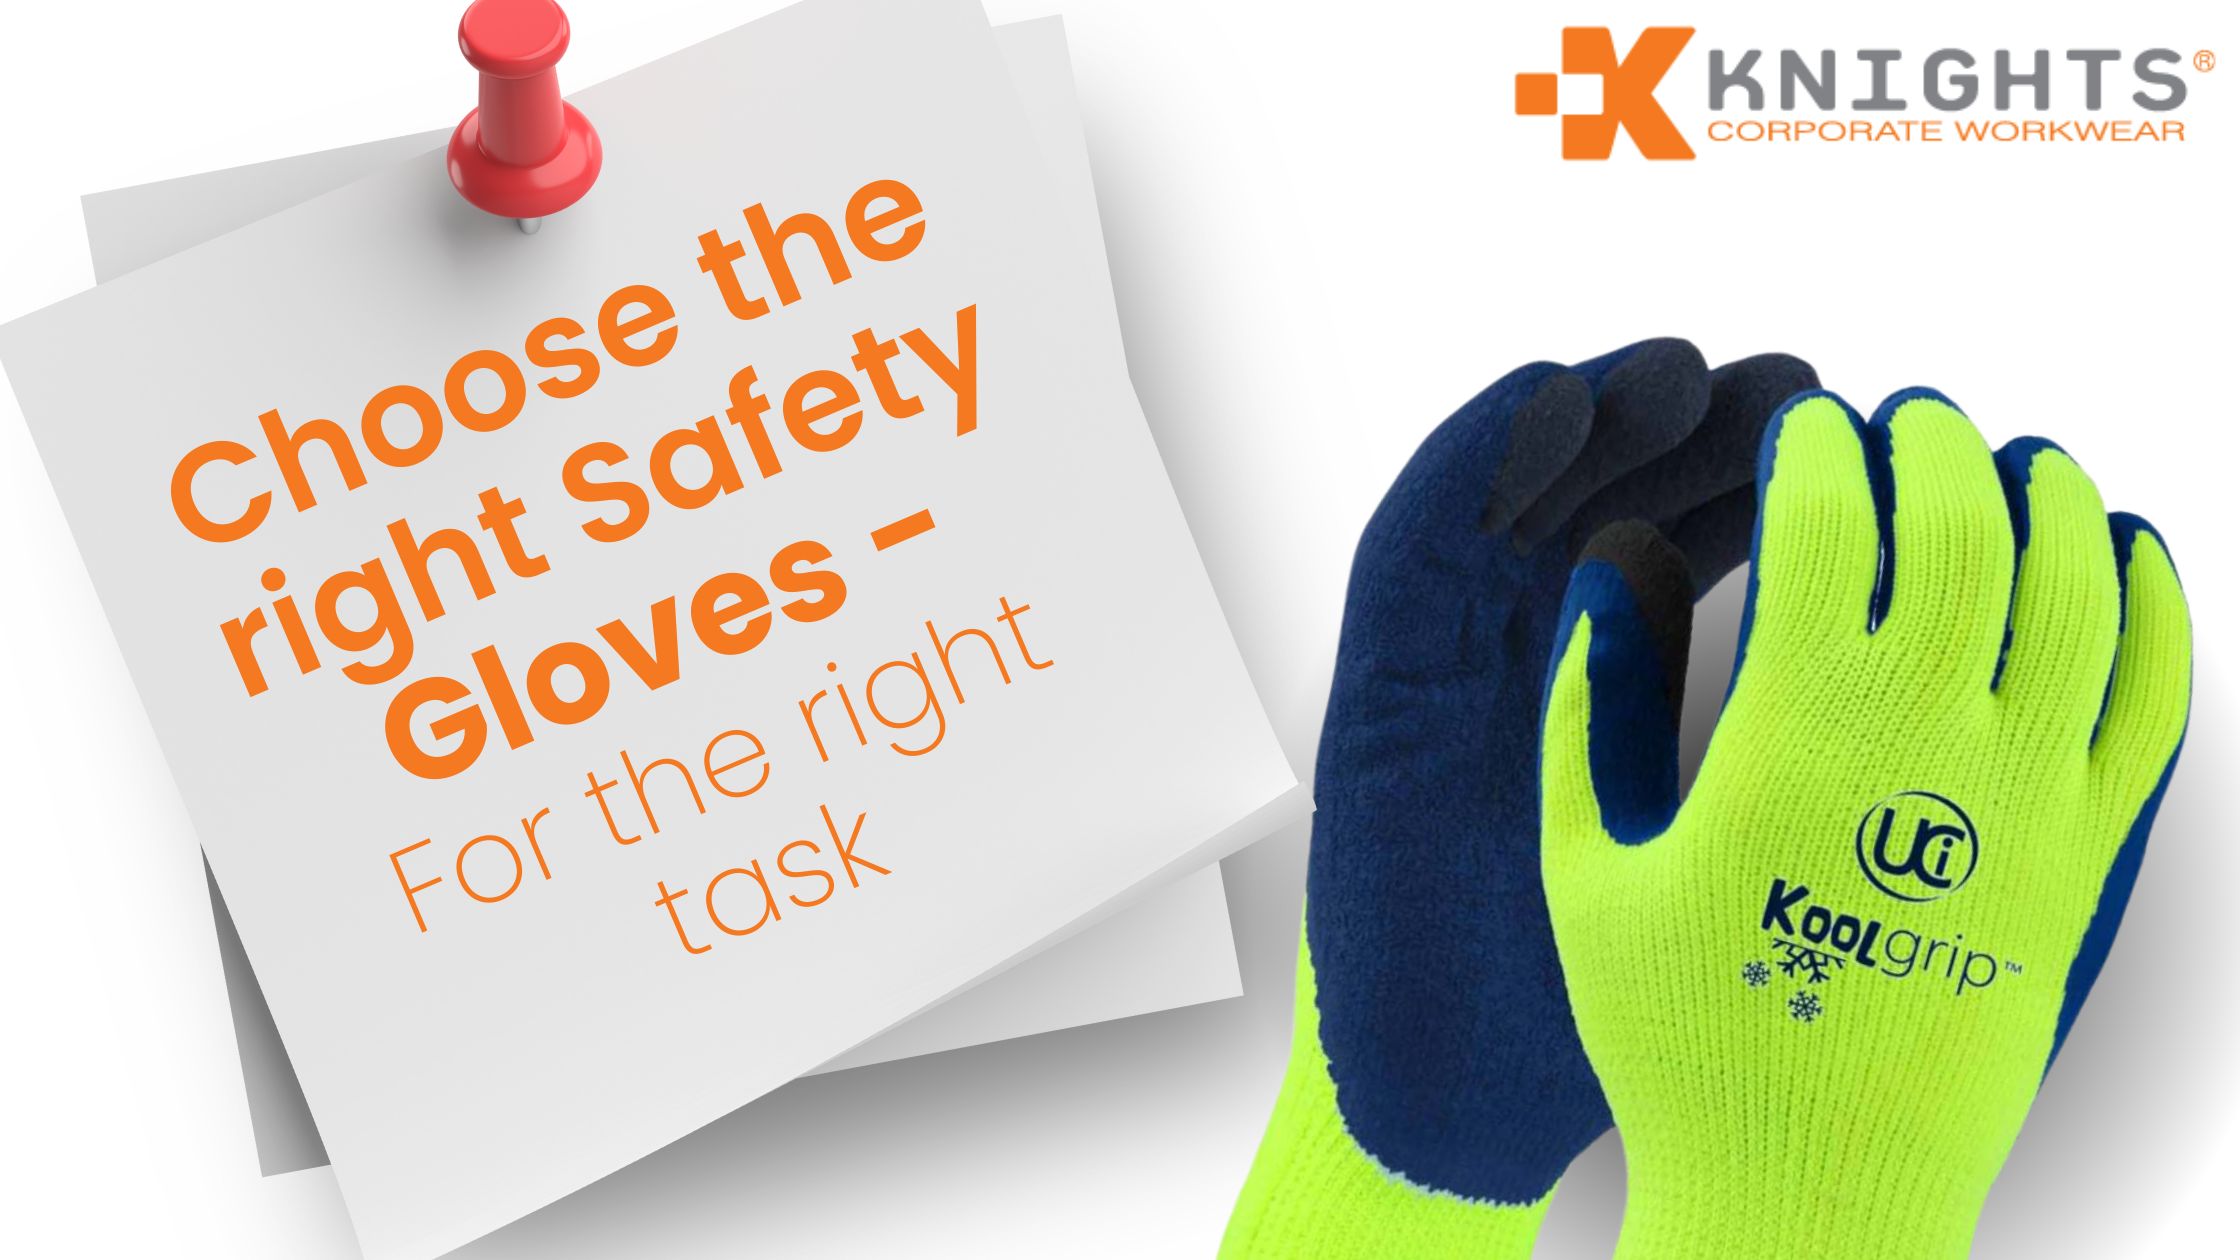 What Do Safety Gloves Protect You From?